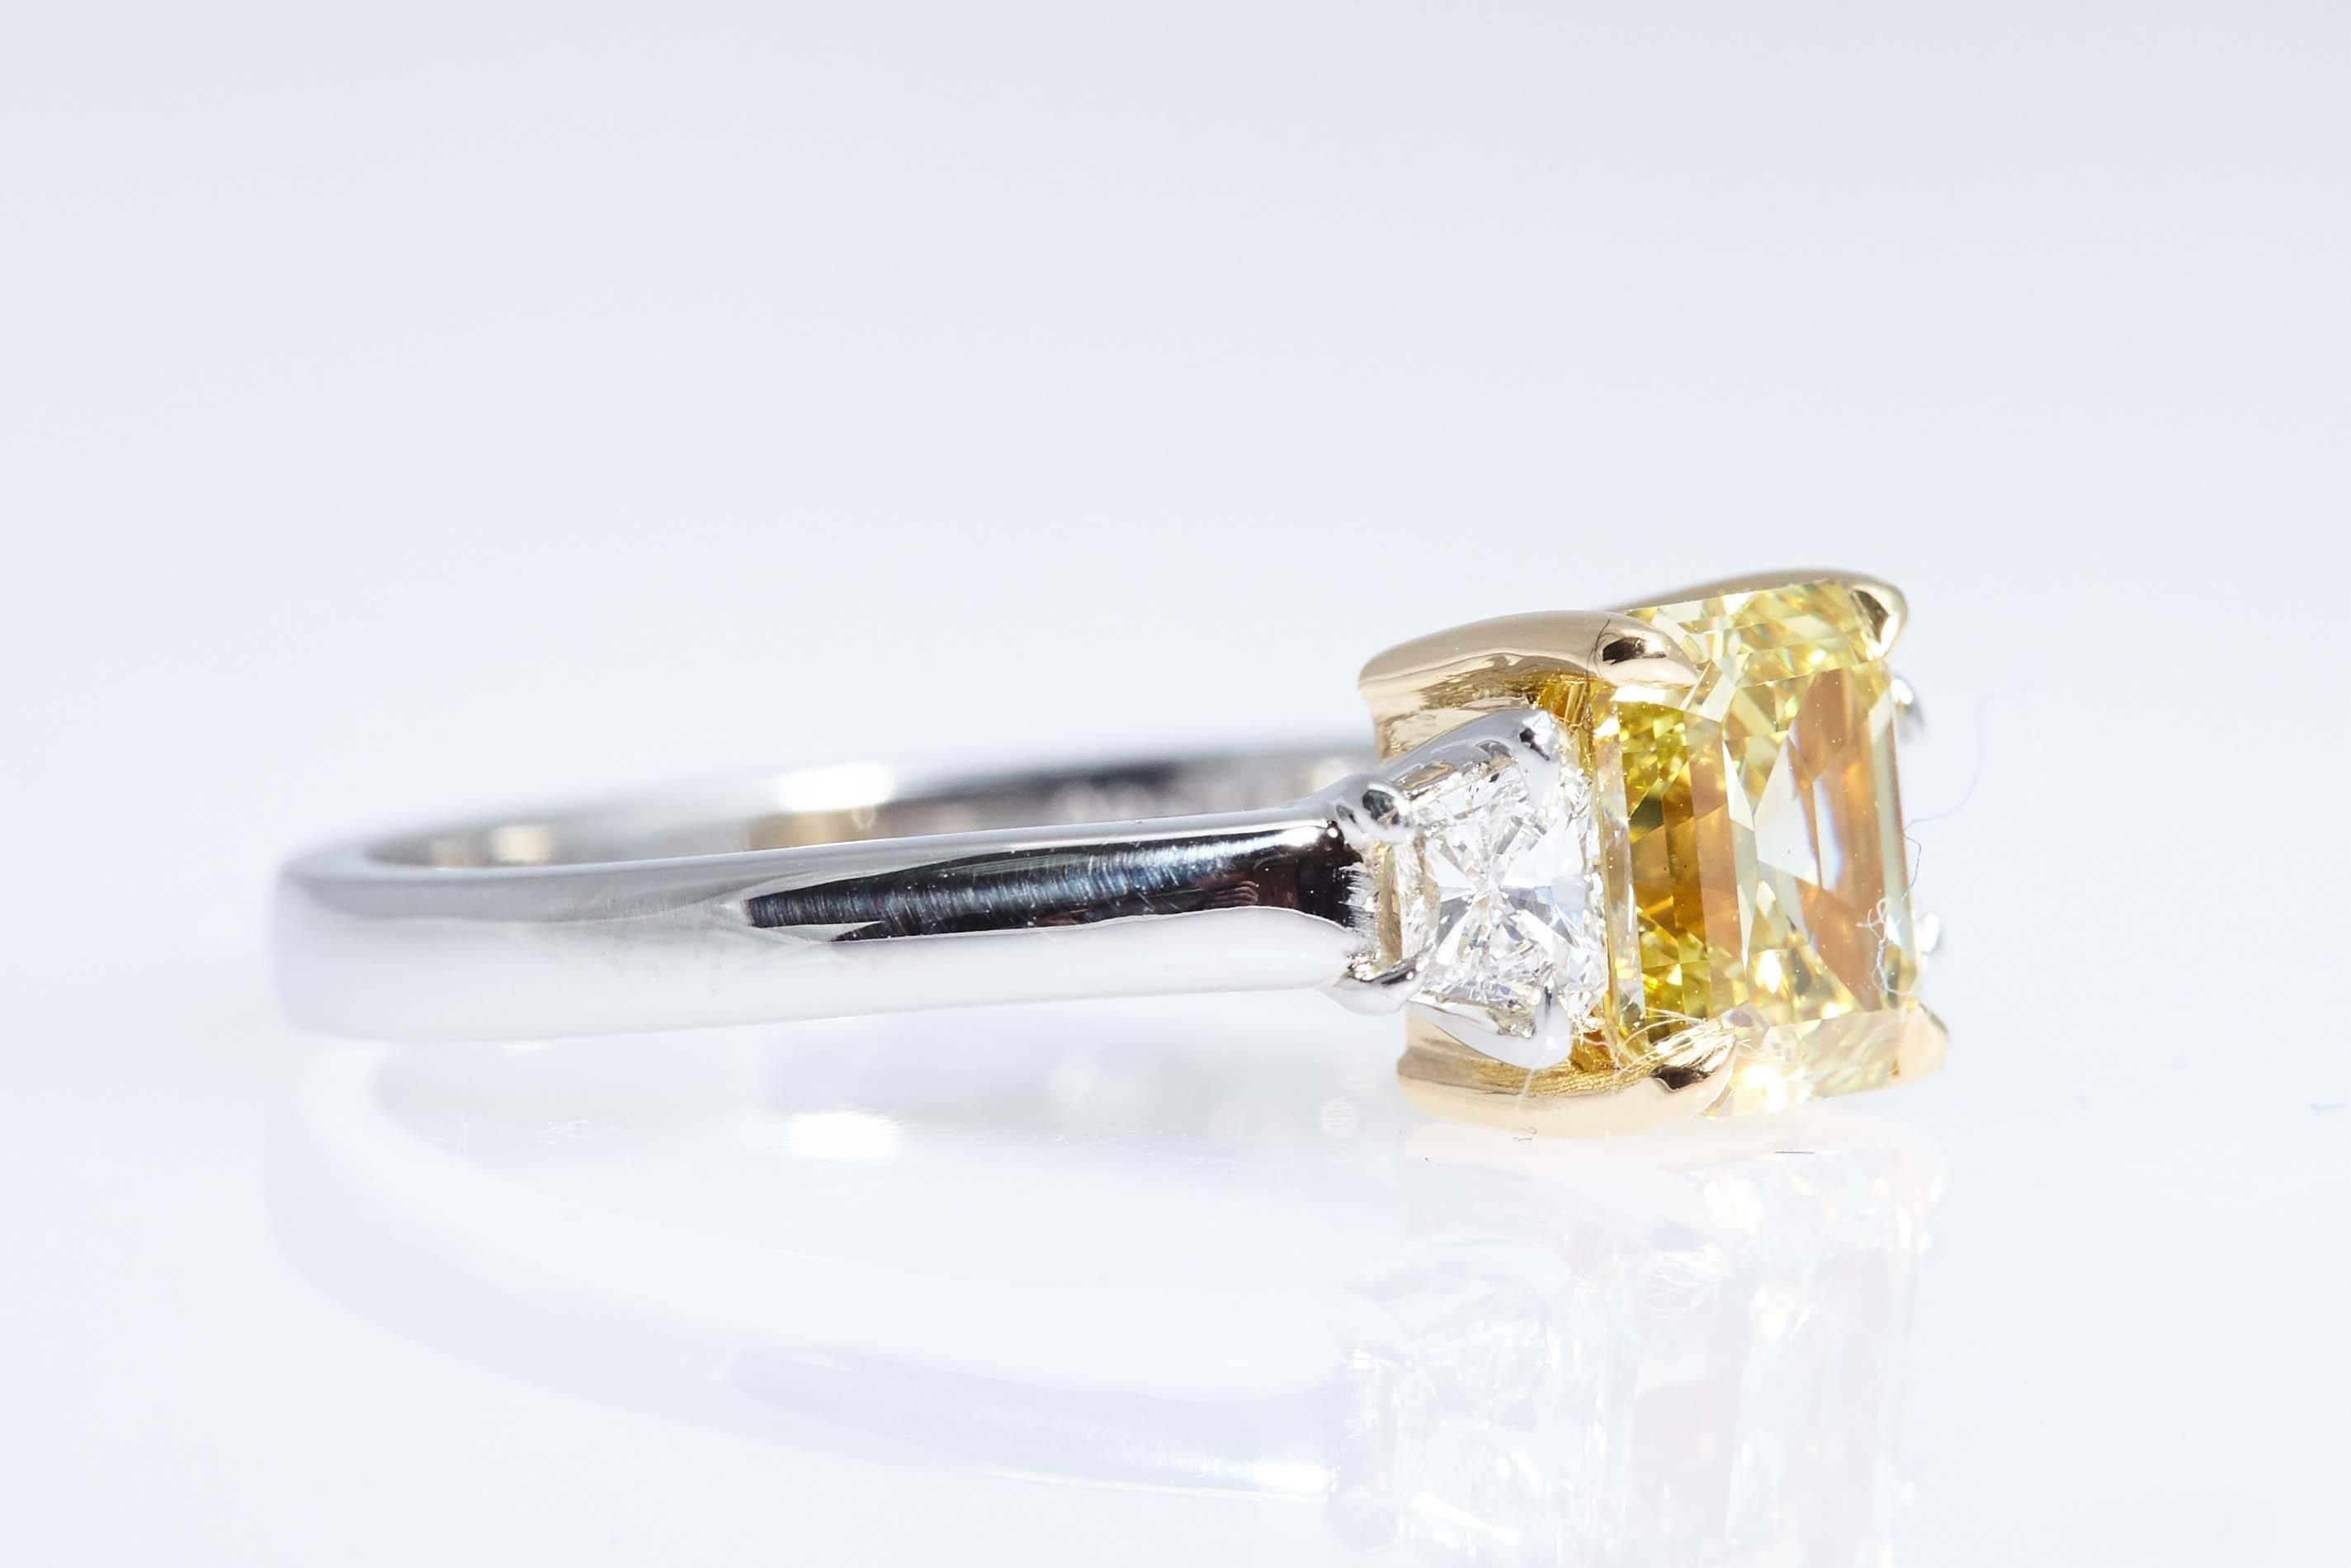 This emerald cut diamond weighs 1.62 carats and has a GIA certificate stating that it is "Fancy Intense Yellow" and "VS1" in clarity.  The ring is platinum with the center stone mounted in eighteen karat yellow gold. The center